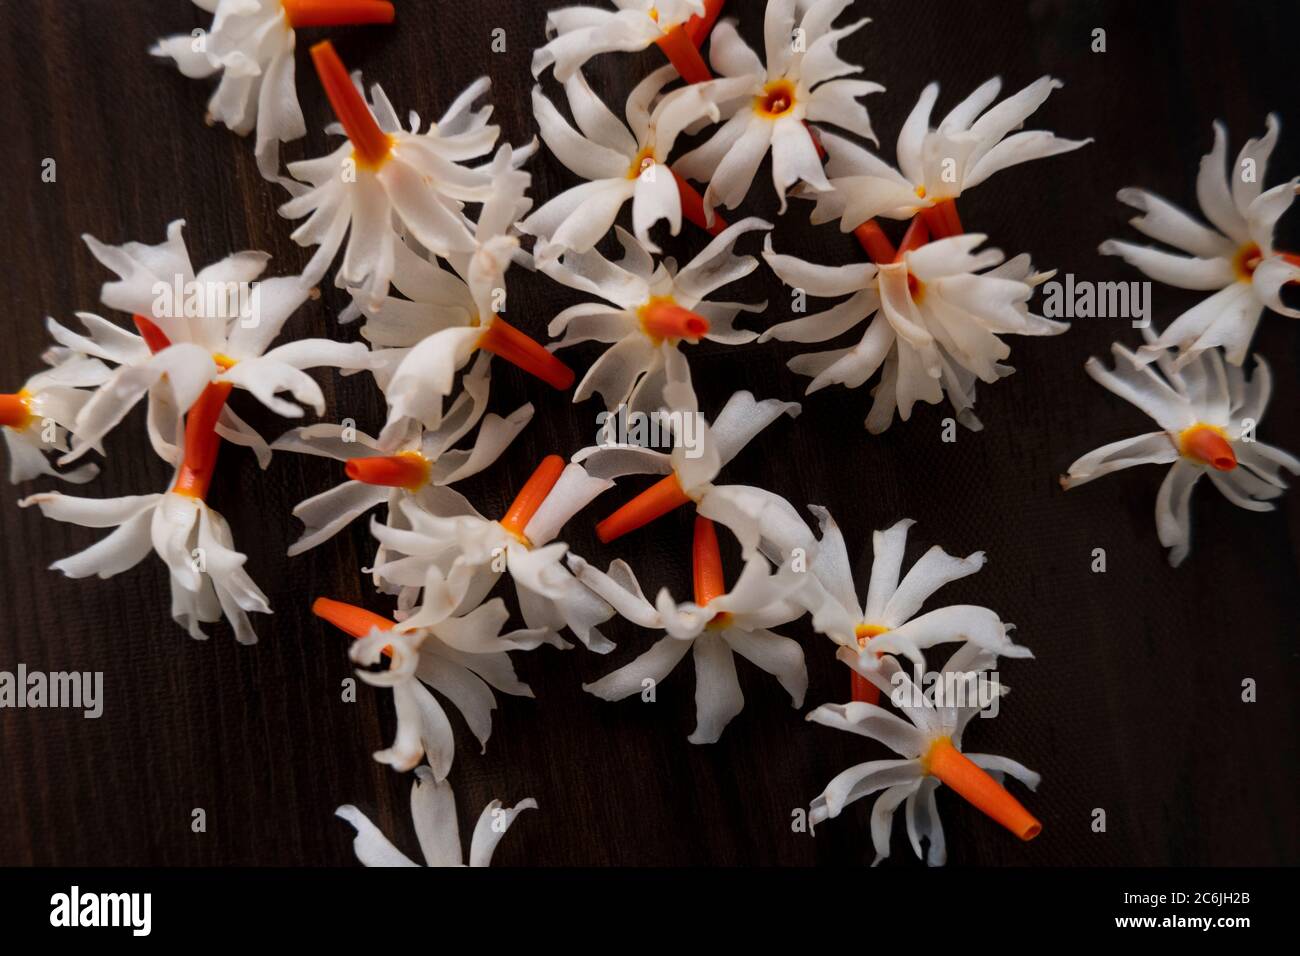 Parijat (Night Jasmine) flower laying on wooden background its called Raat Ki Rani In India. The amazing fragrance of this flower uses in many spiritu Stock Photo